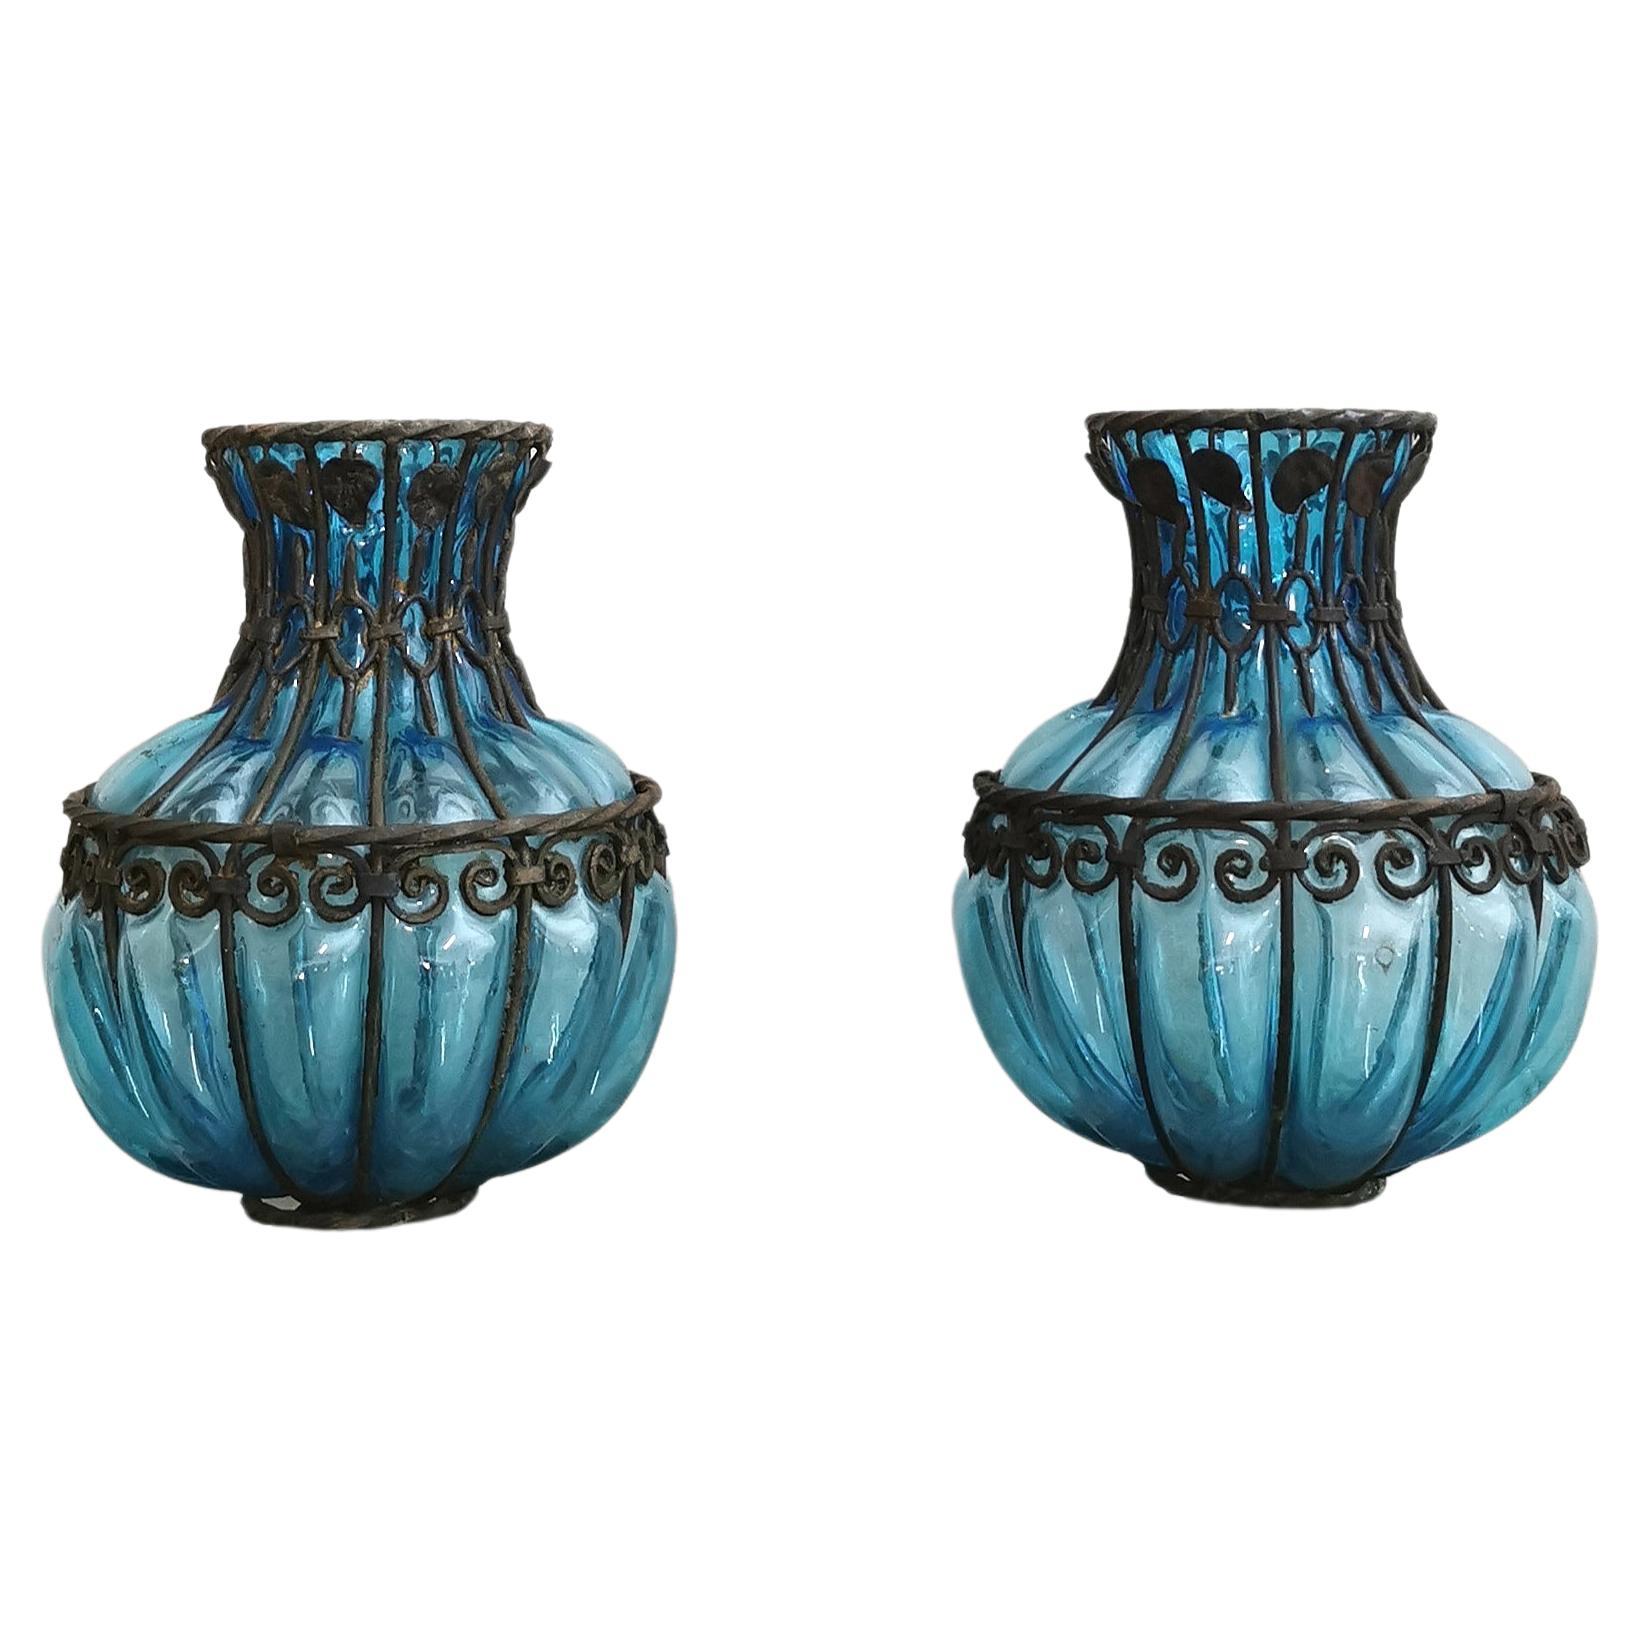 Midcentury Vases Centerpieces Murano Glass Blue Metal Italy 1980s Set of 2